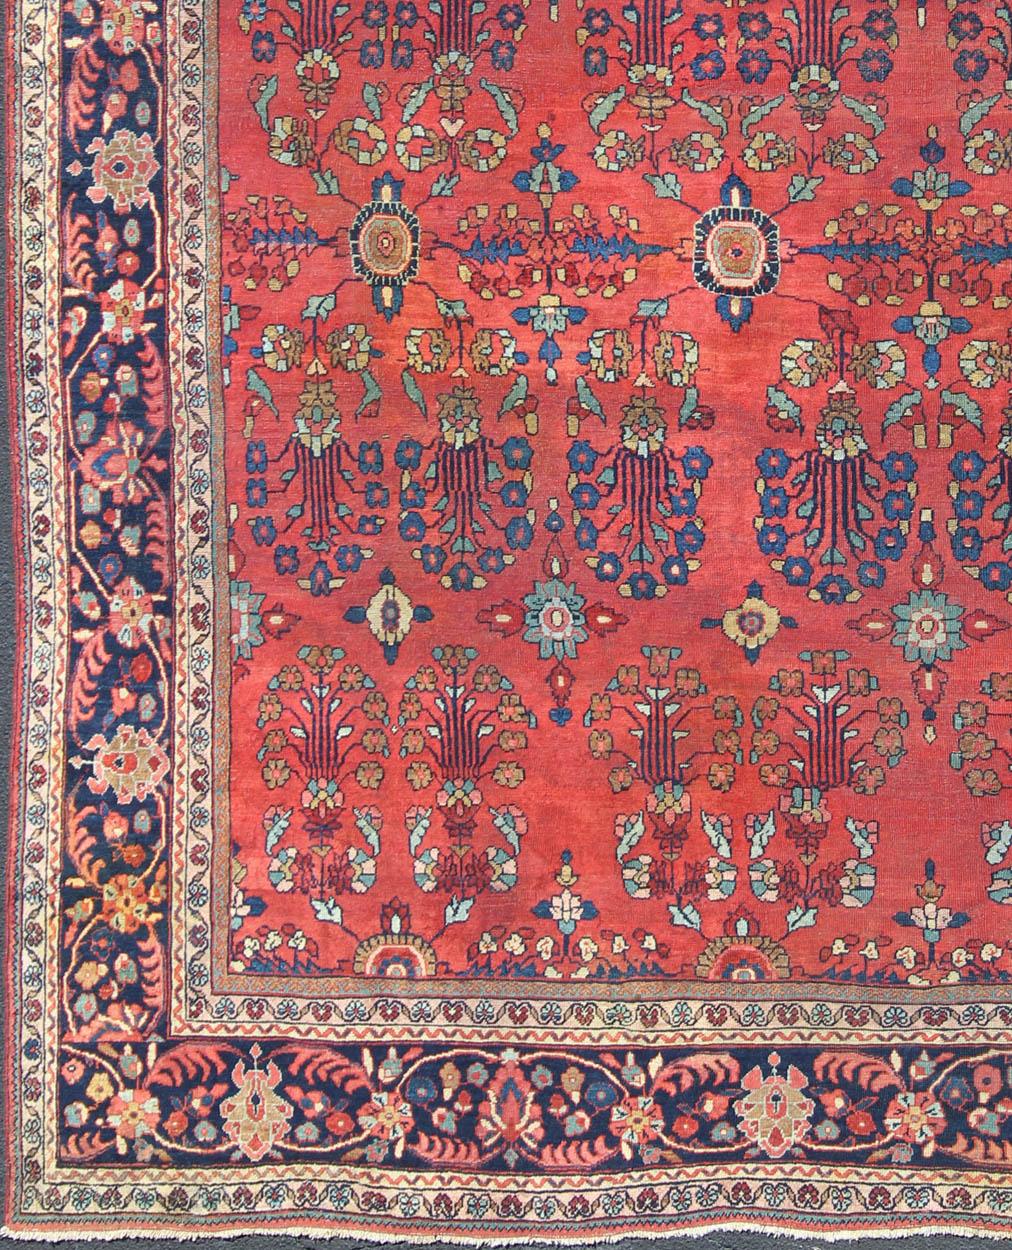 Antique Sultanabad Carpet with All-Over Large Scale Flower Design With Red Field. Keivan Woven Arts / Rug / S12-0106 / country of origin / type: Iran / Sultanabad / circa 1910.
This Sultanabad Mahal relies heavily on exquisite details as well as